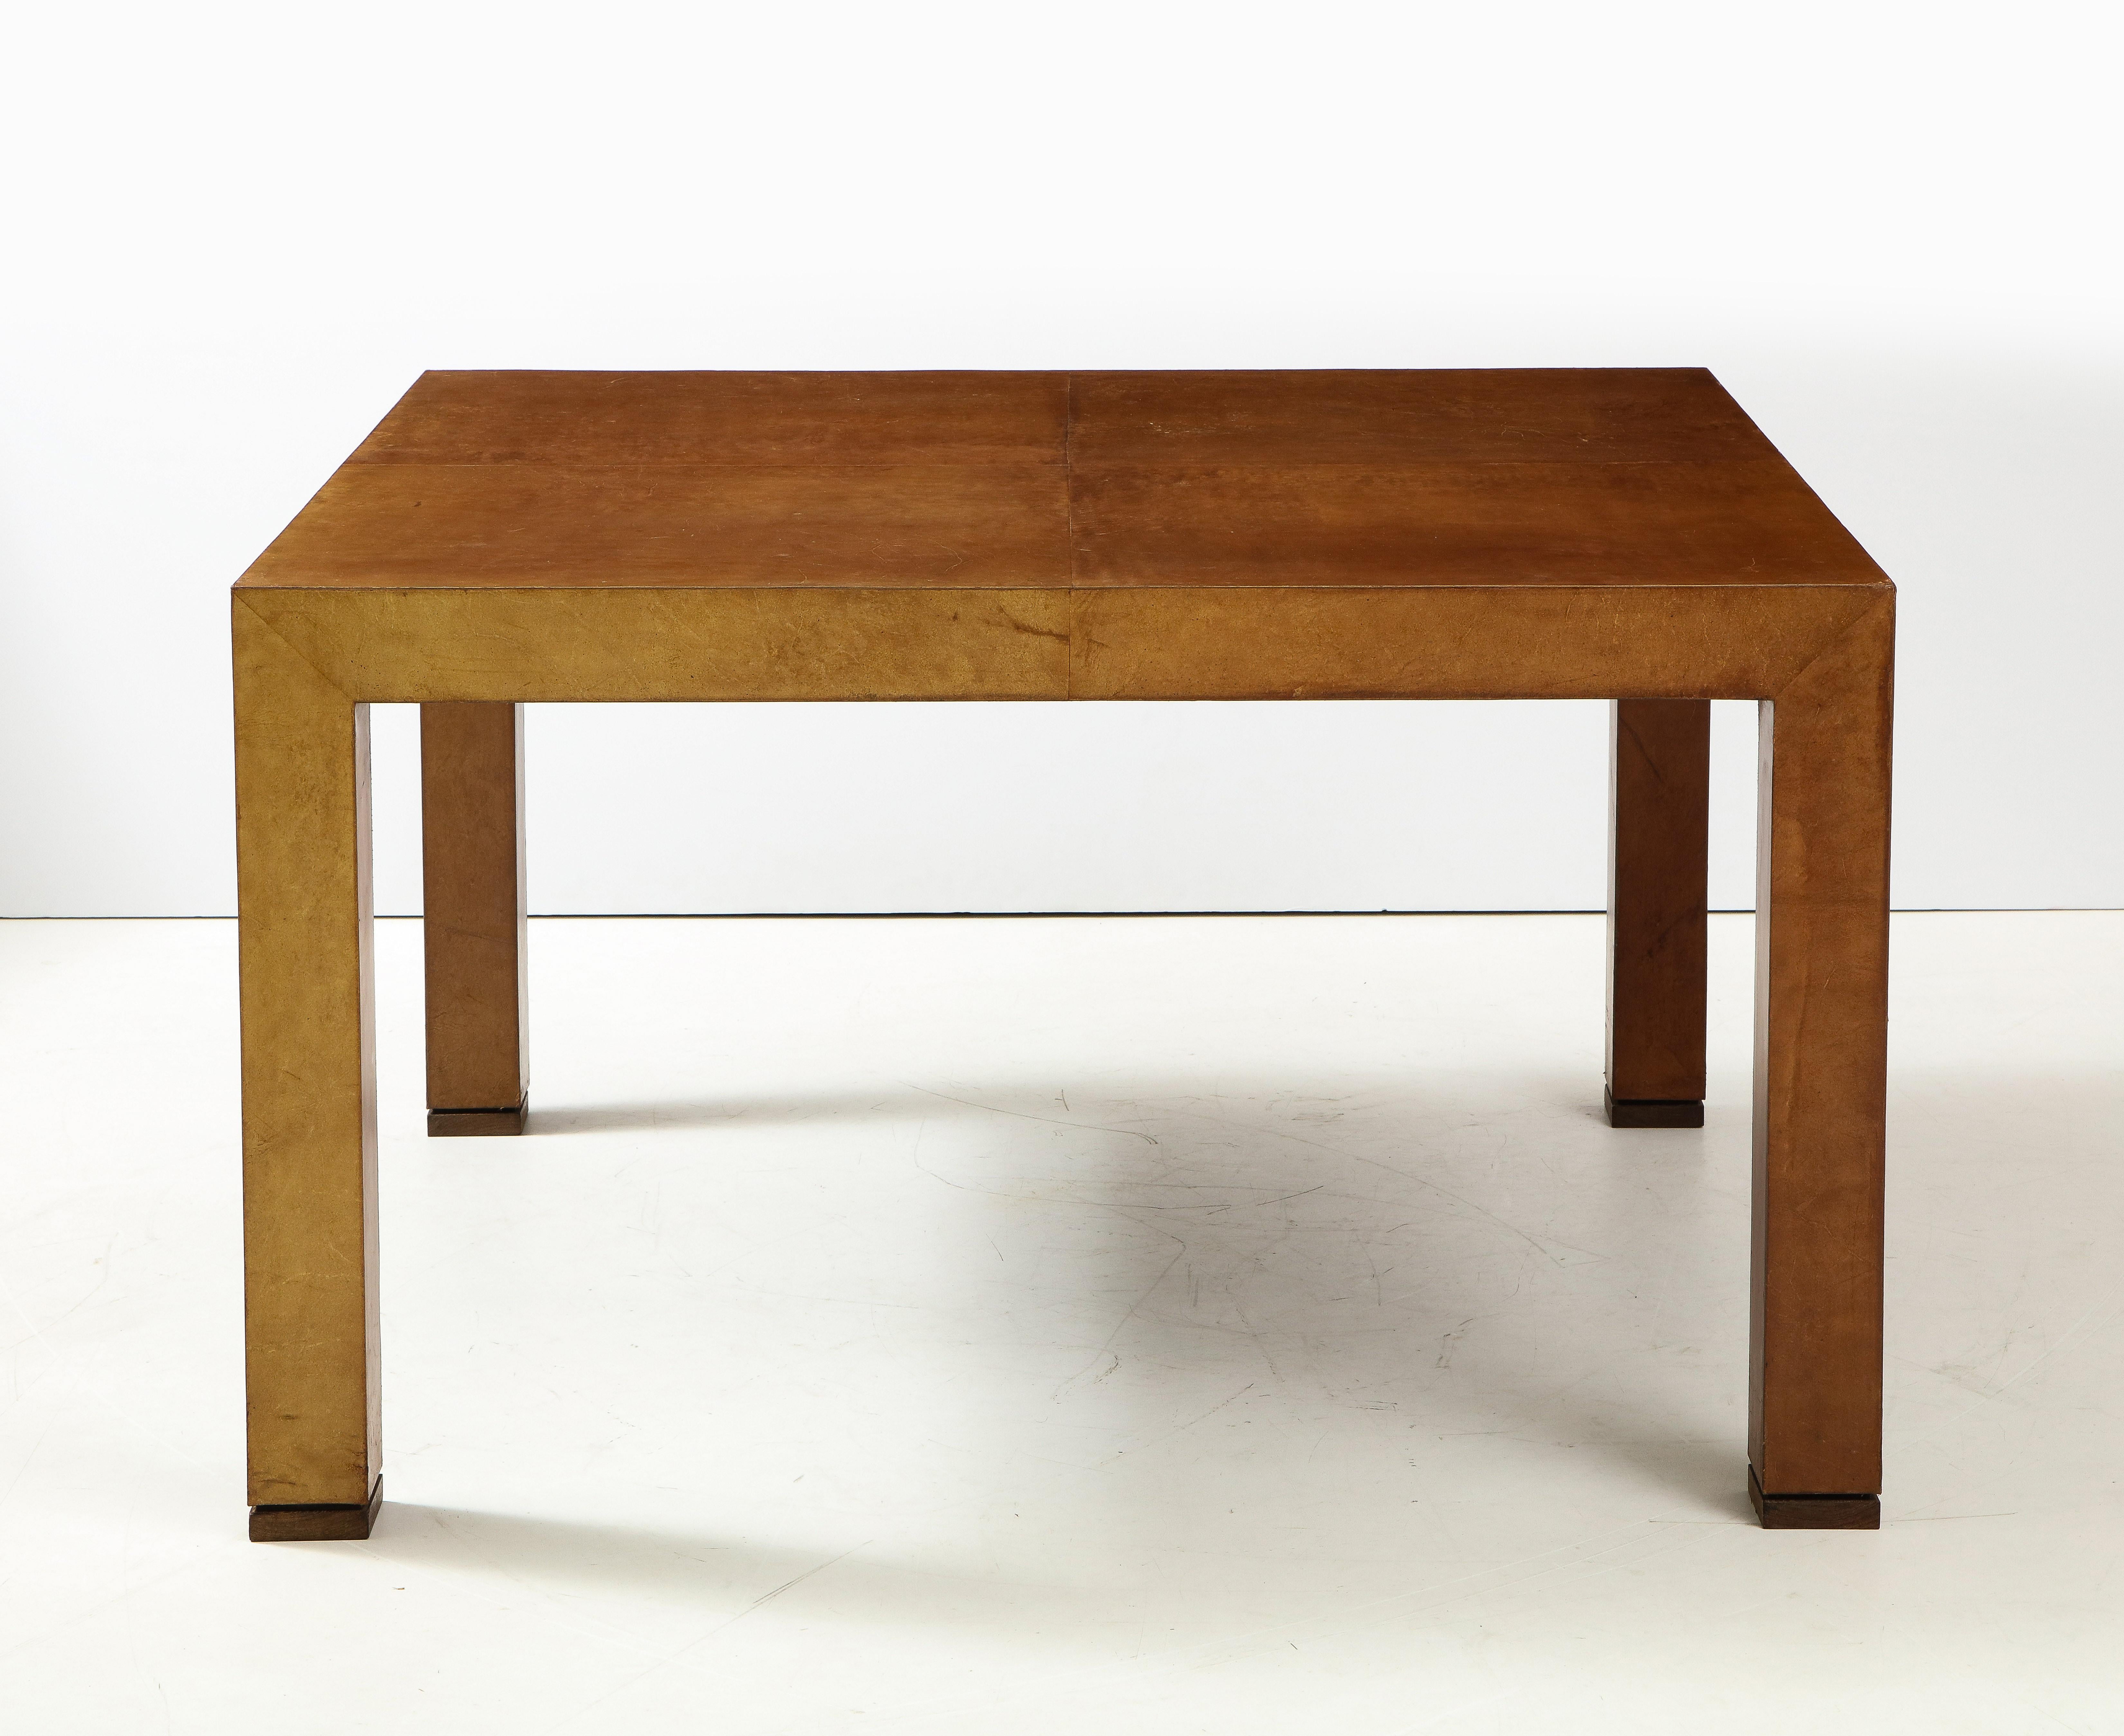 Havana Leather Dining Table, France, c. 1960-70 For Sale 2